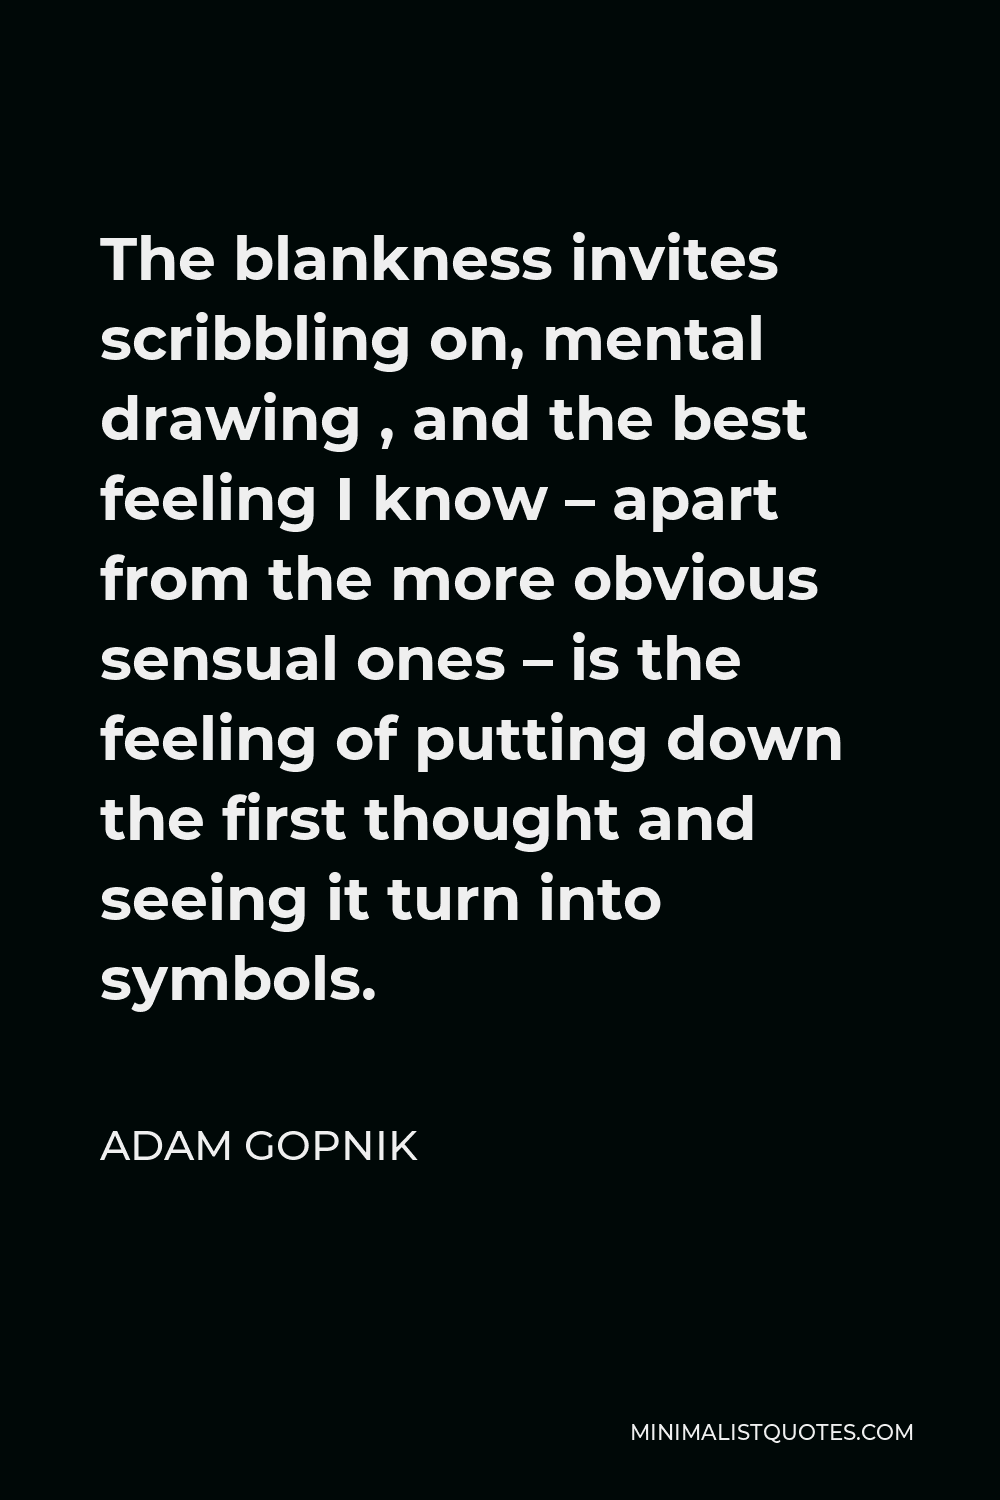 Adam Gopnik Quote - The blankness invites scribbling on, mental drawing , and the best feeling I know – apart from the more obvious sensual ones – is the feeling of putting down the first thought and seeing it turn into symbols.